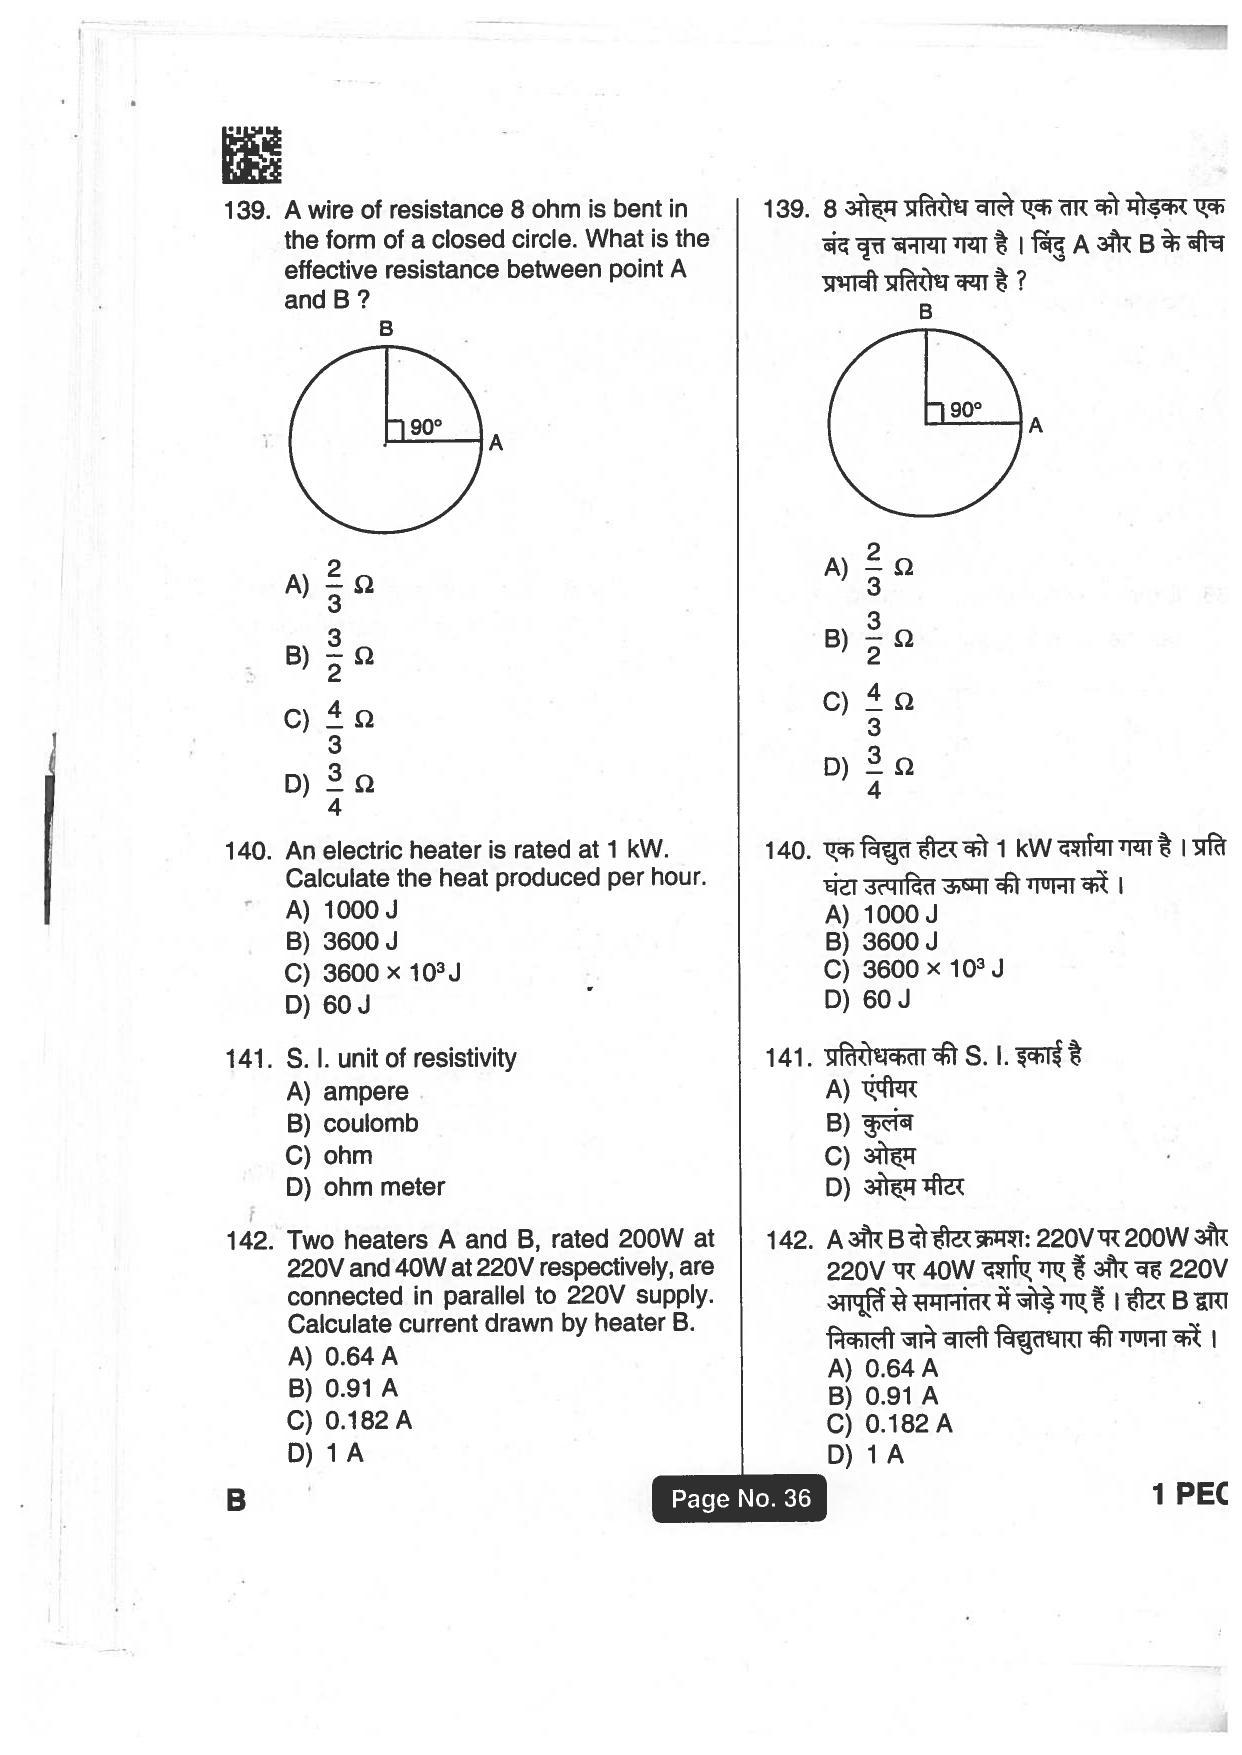 Jharkhand Polytechnic SET B 2018 Question Paper with Answers - Page 35